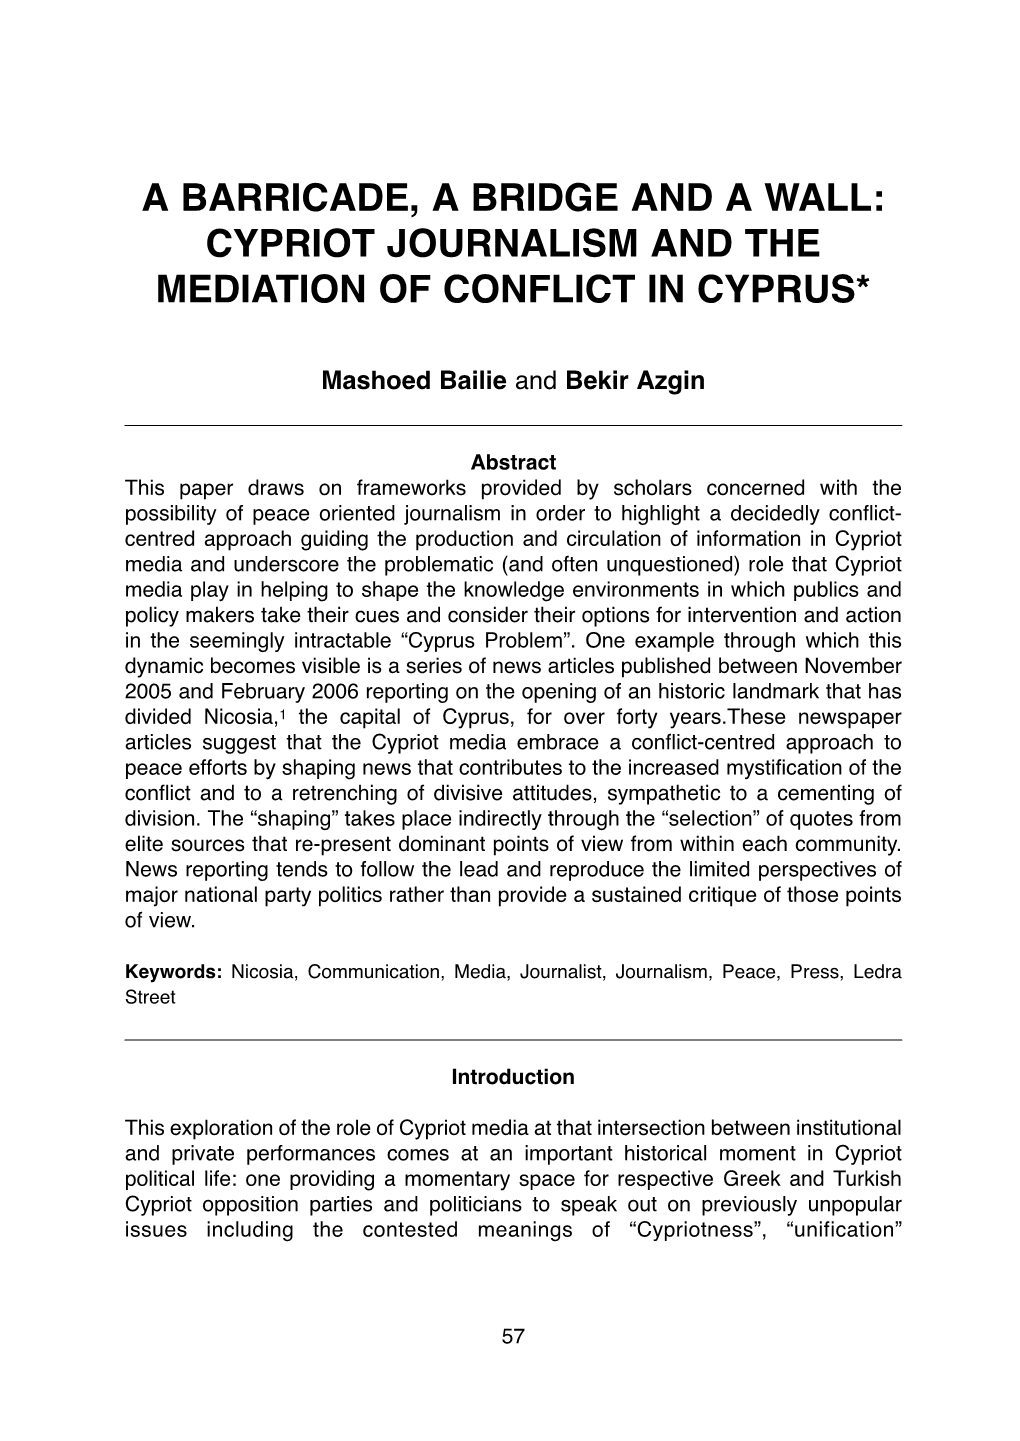 Cypriot Journalism and the Mediation of Conflict in Cyprus*